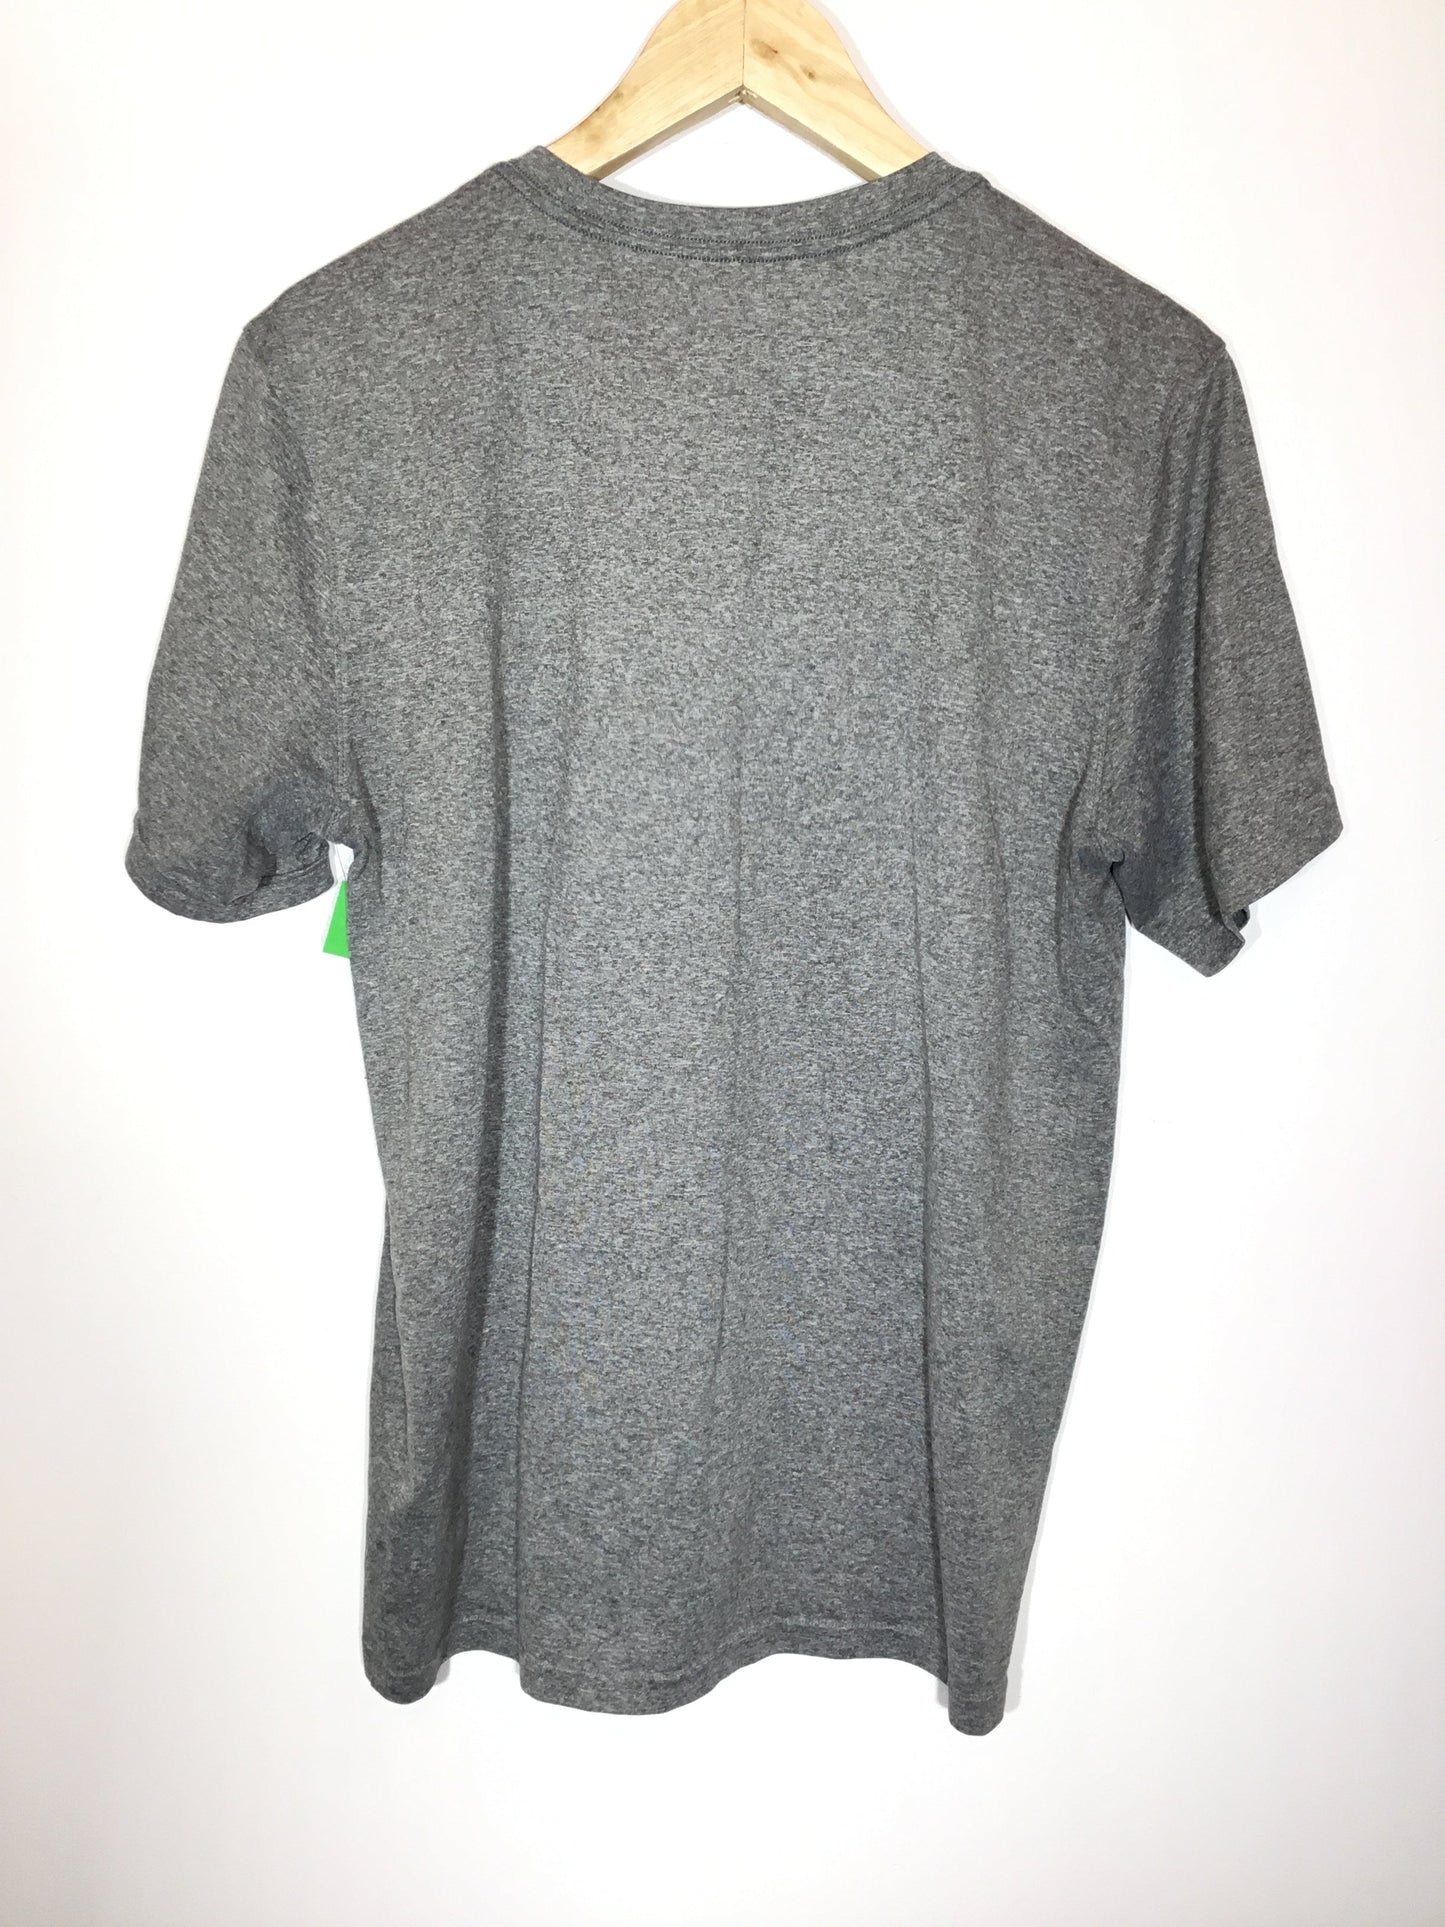 Athletic Top Short Sleeve By Nike  Size: L